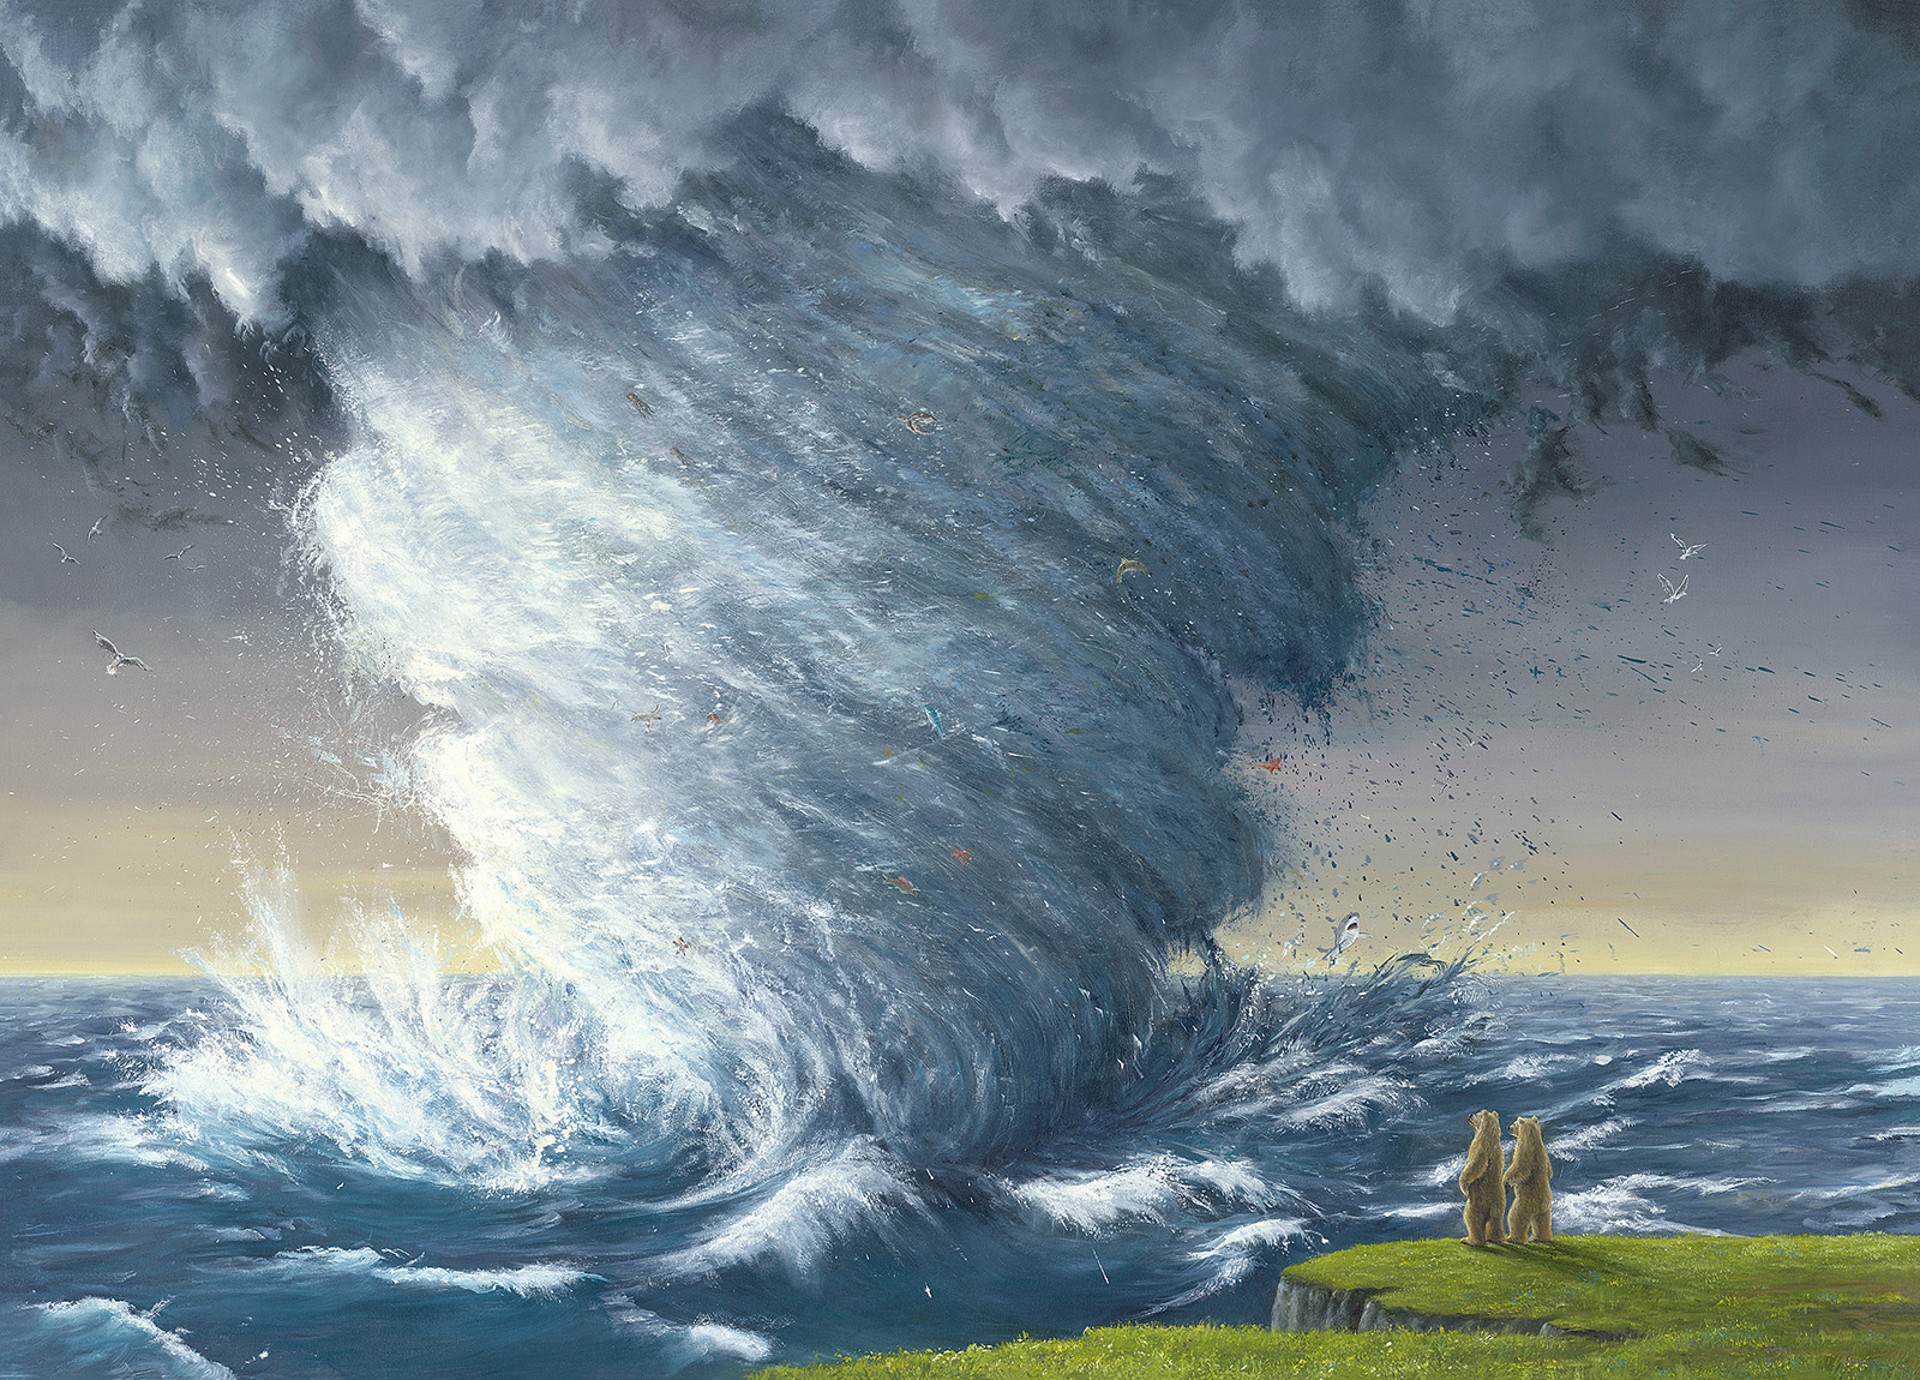 The Tempest by Robert Bissell